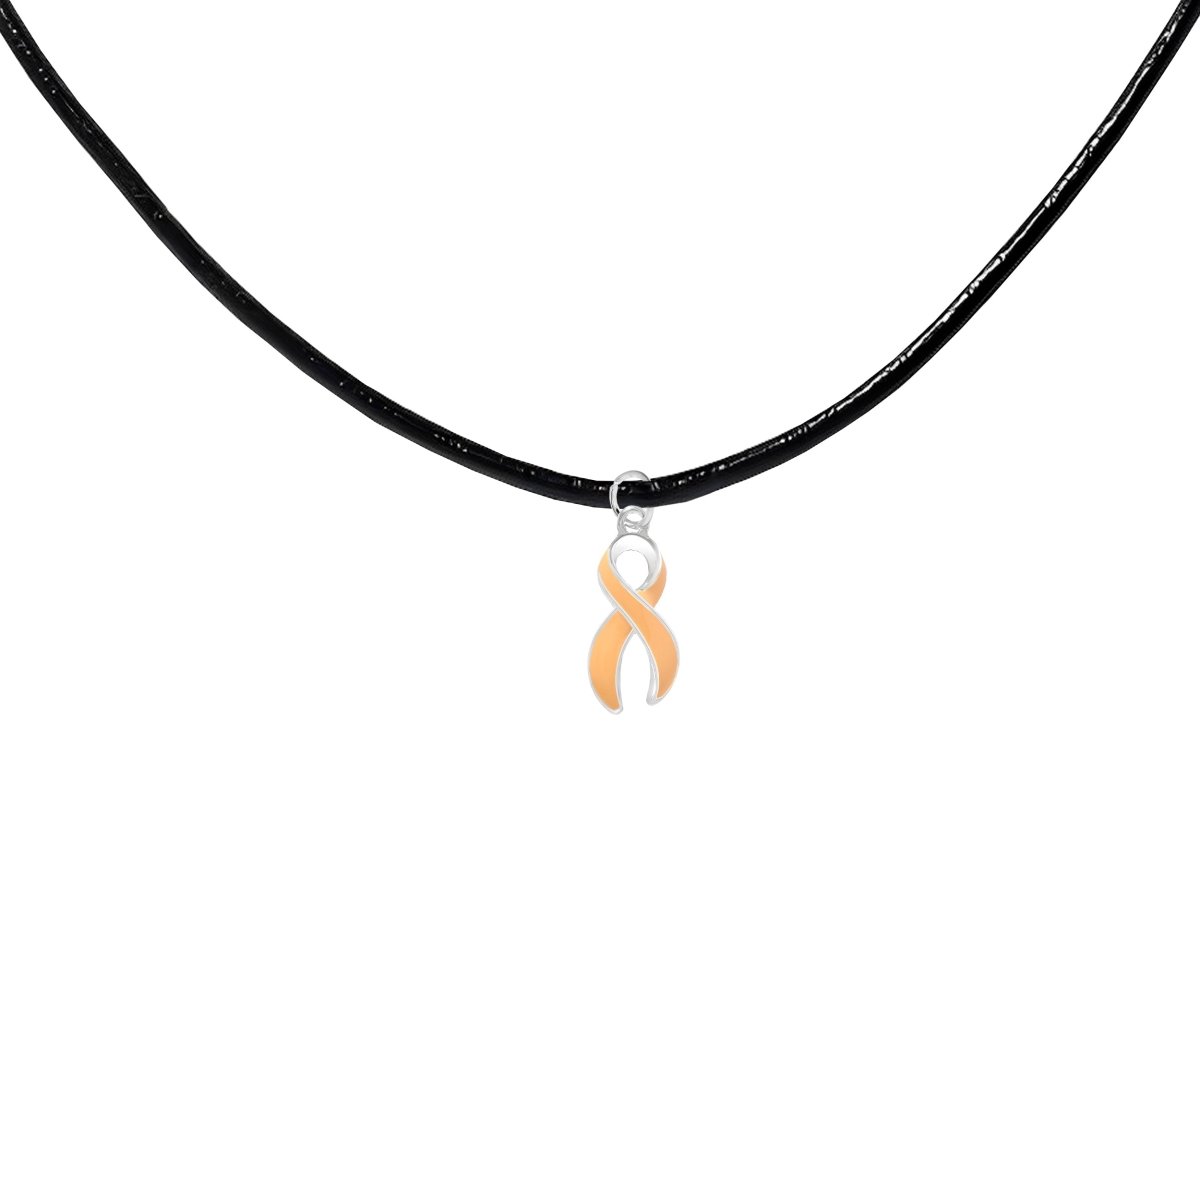 Large Peach Ribbon Black Cord Necklaces - Fundraising For A Cause